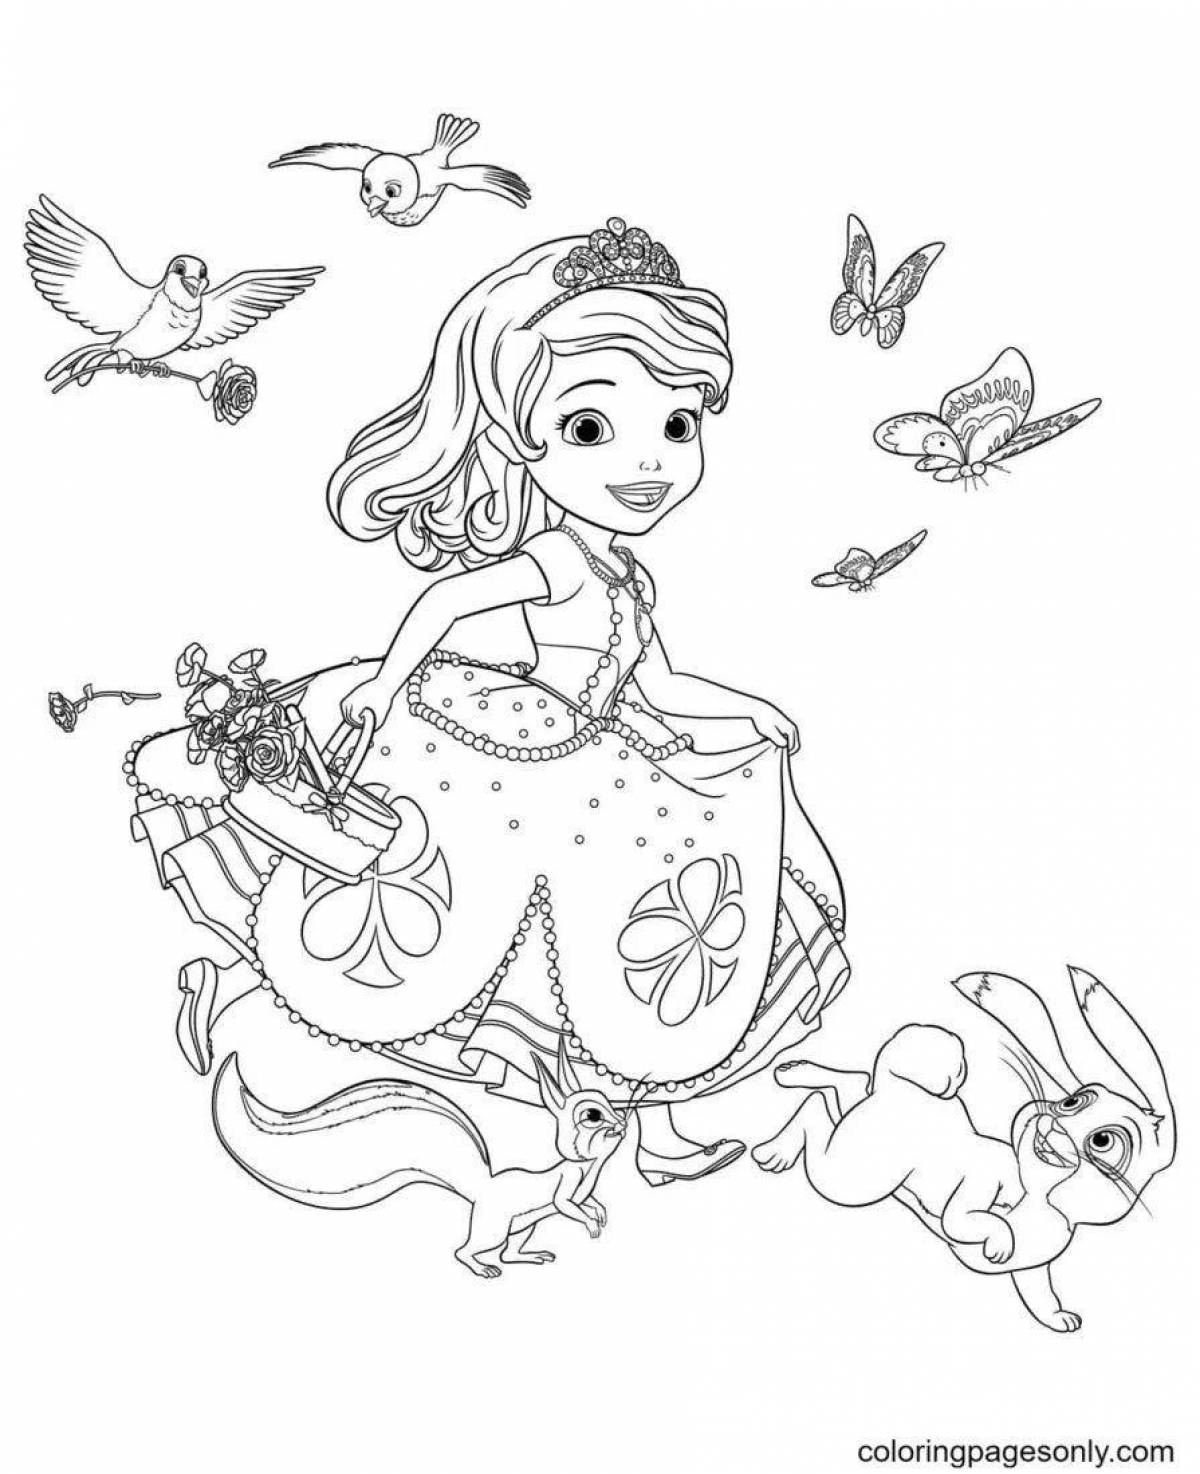 Amazing sophia coloring book for kids